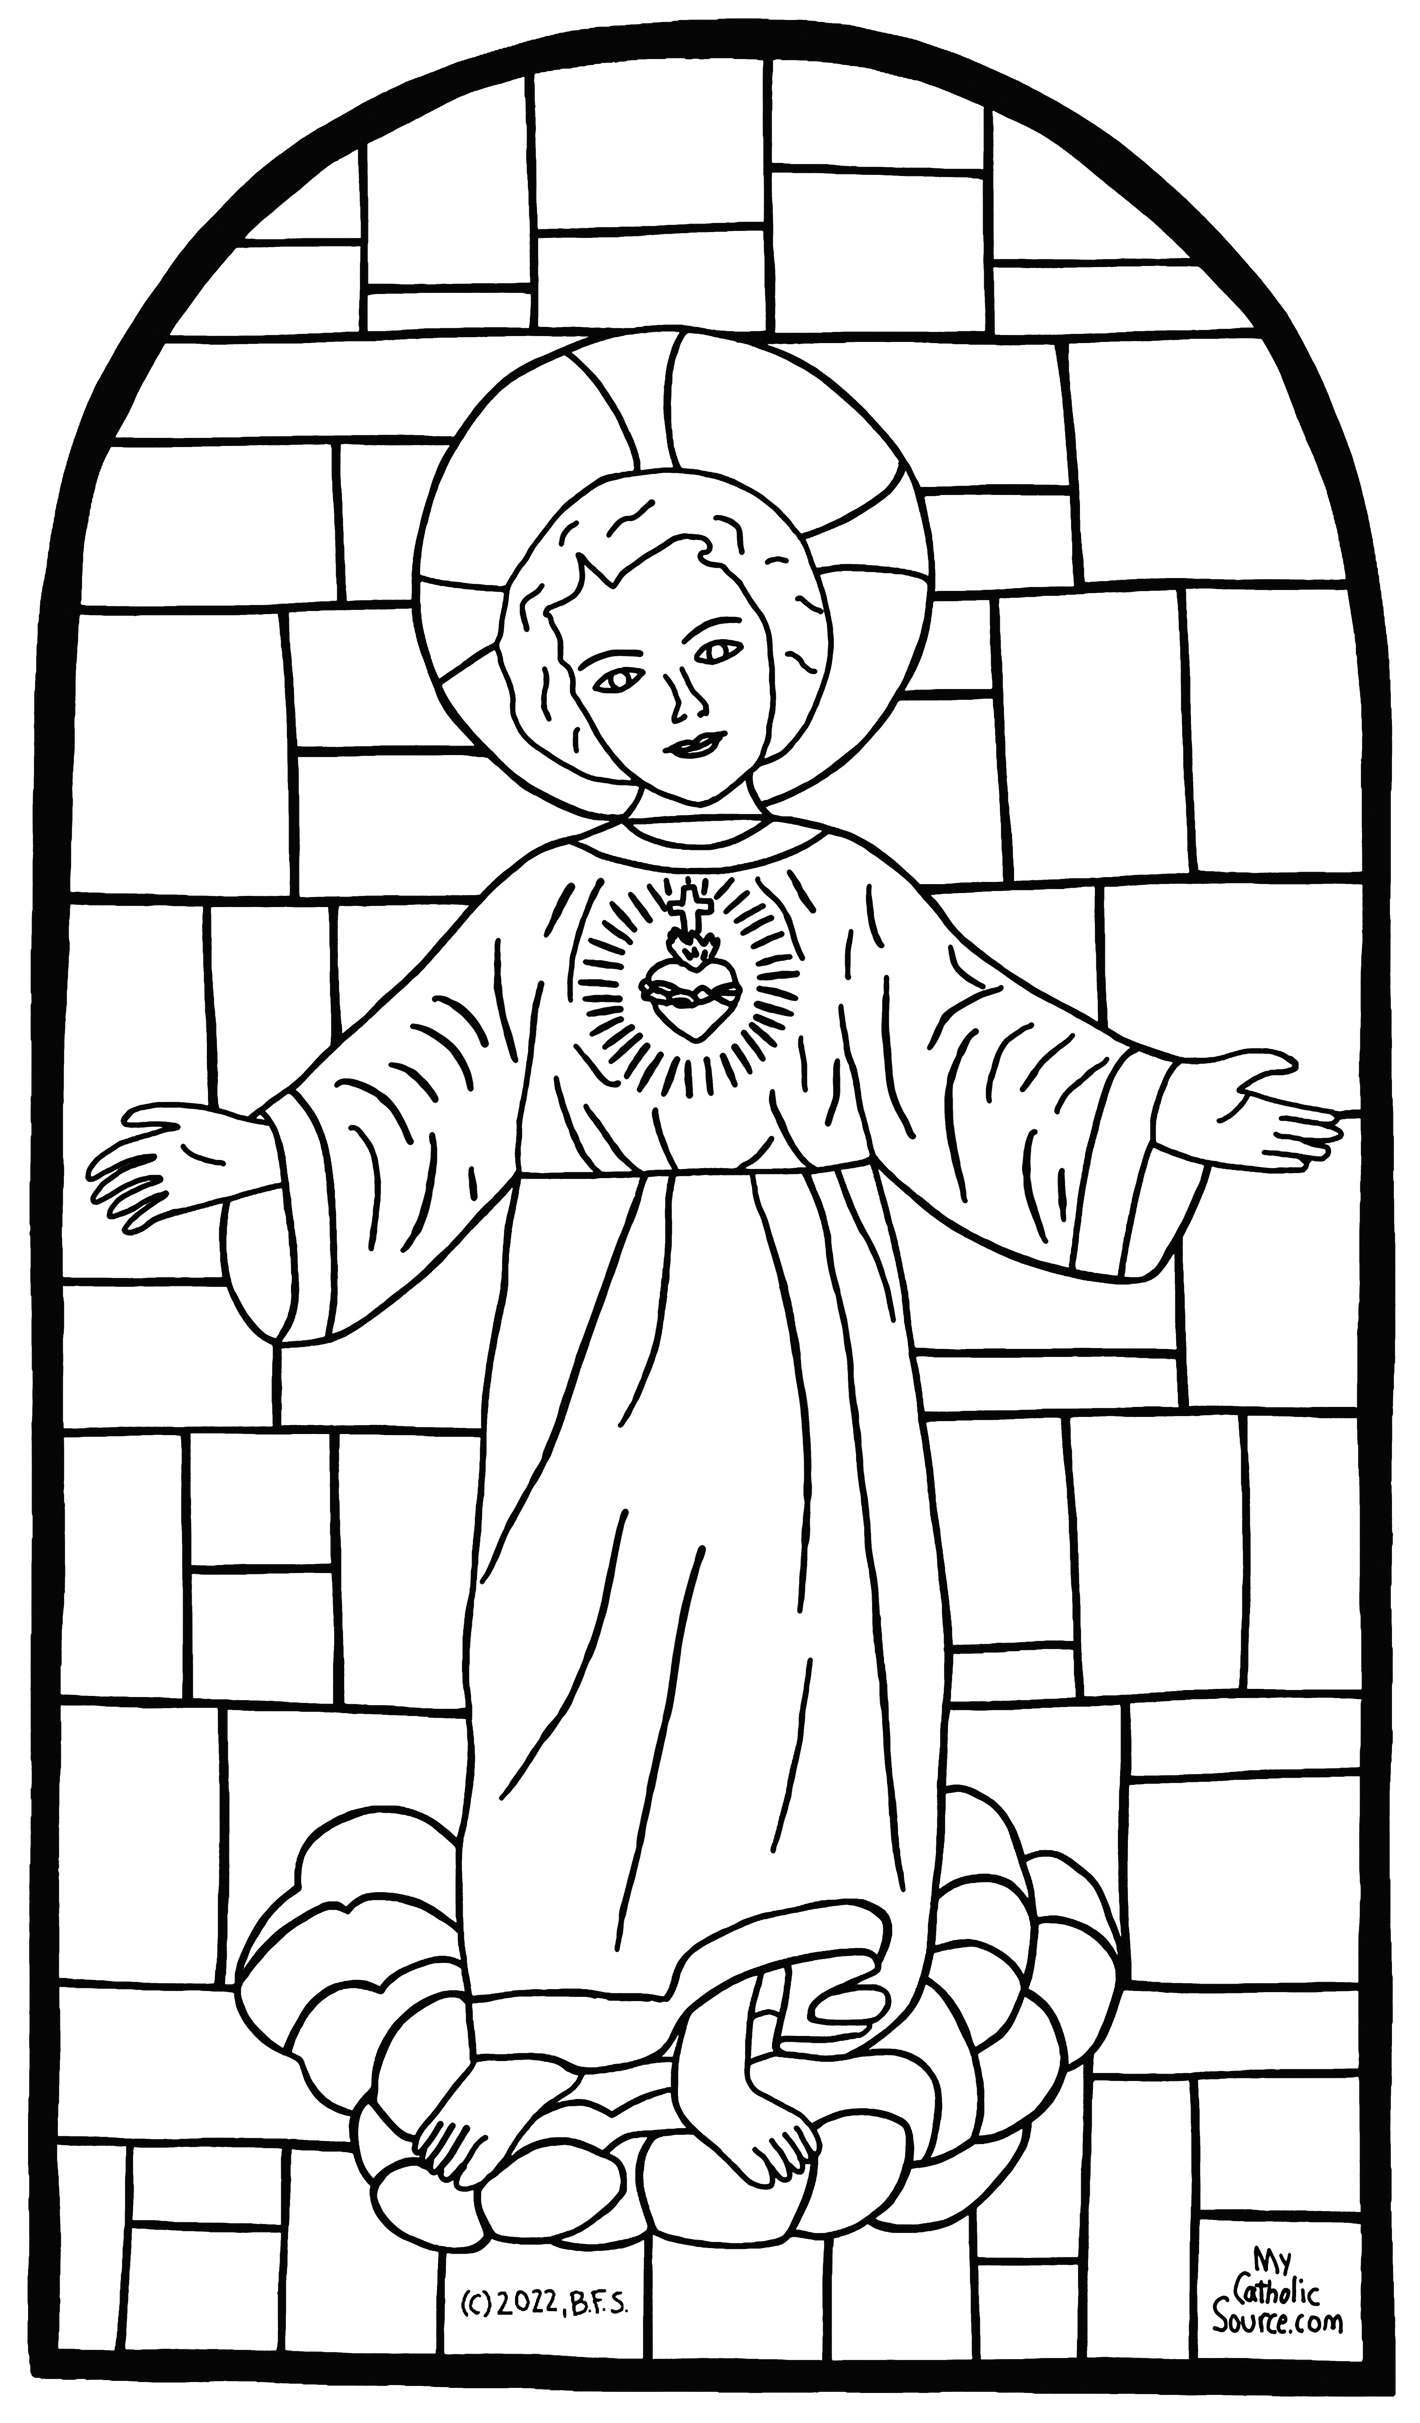 Coloring Book Image (Hand Drawn/Traced Stained Glass)